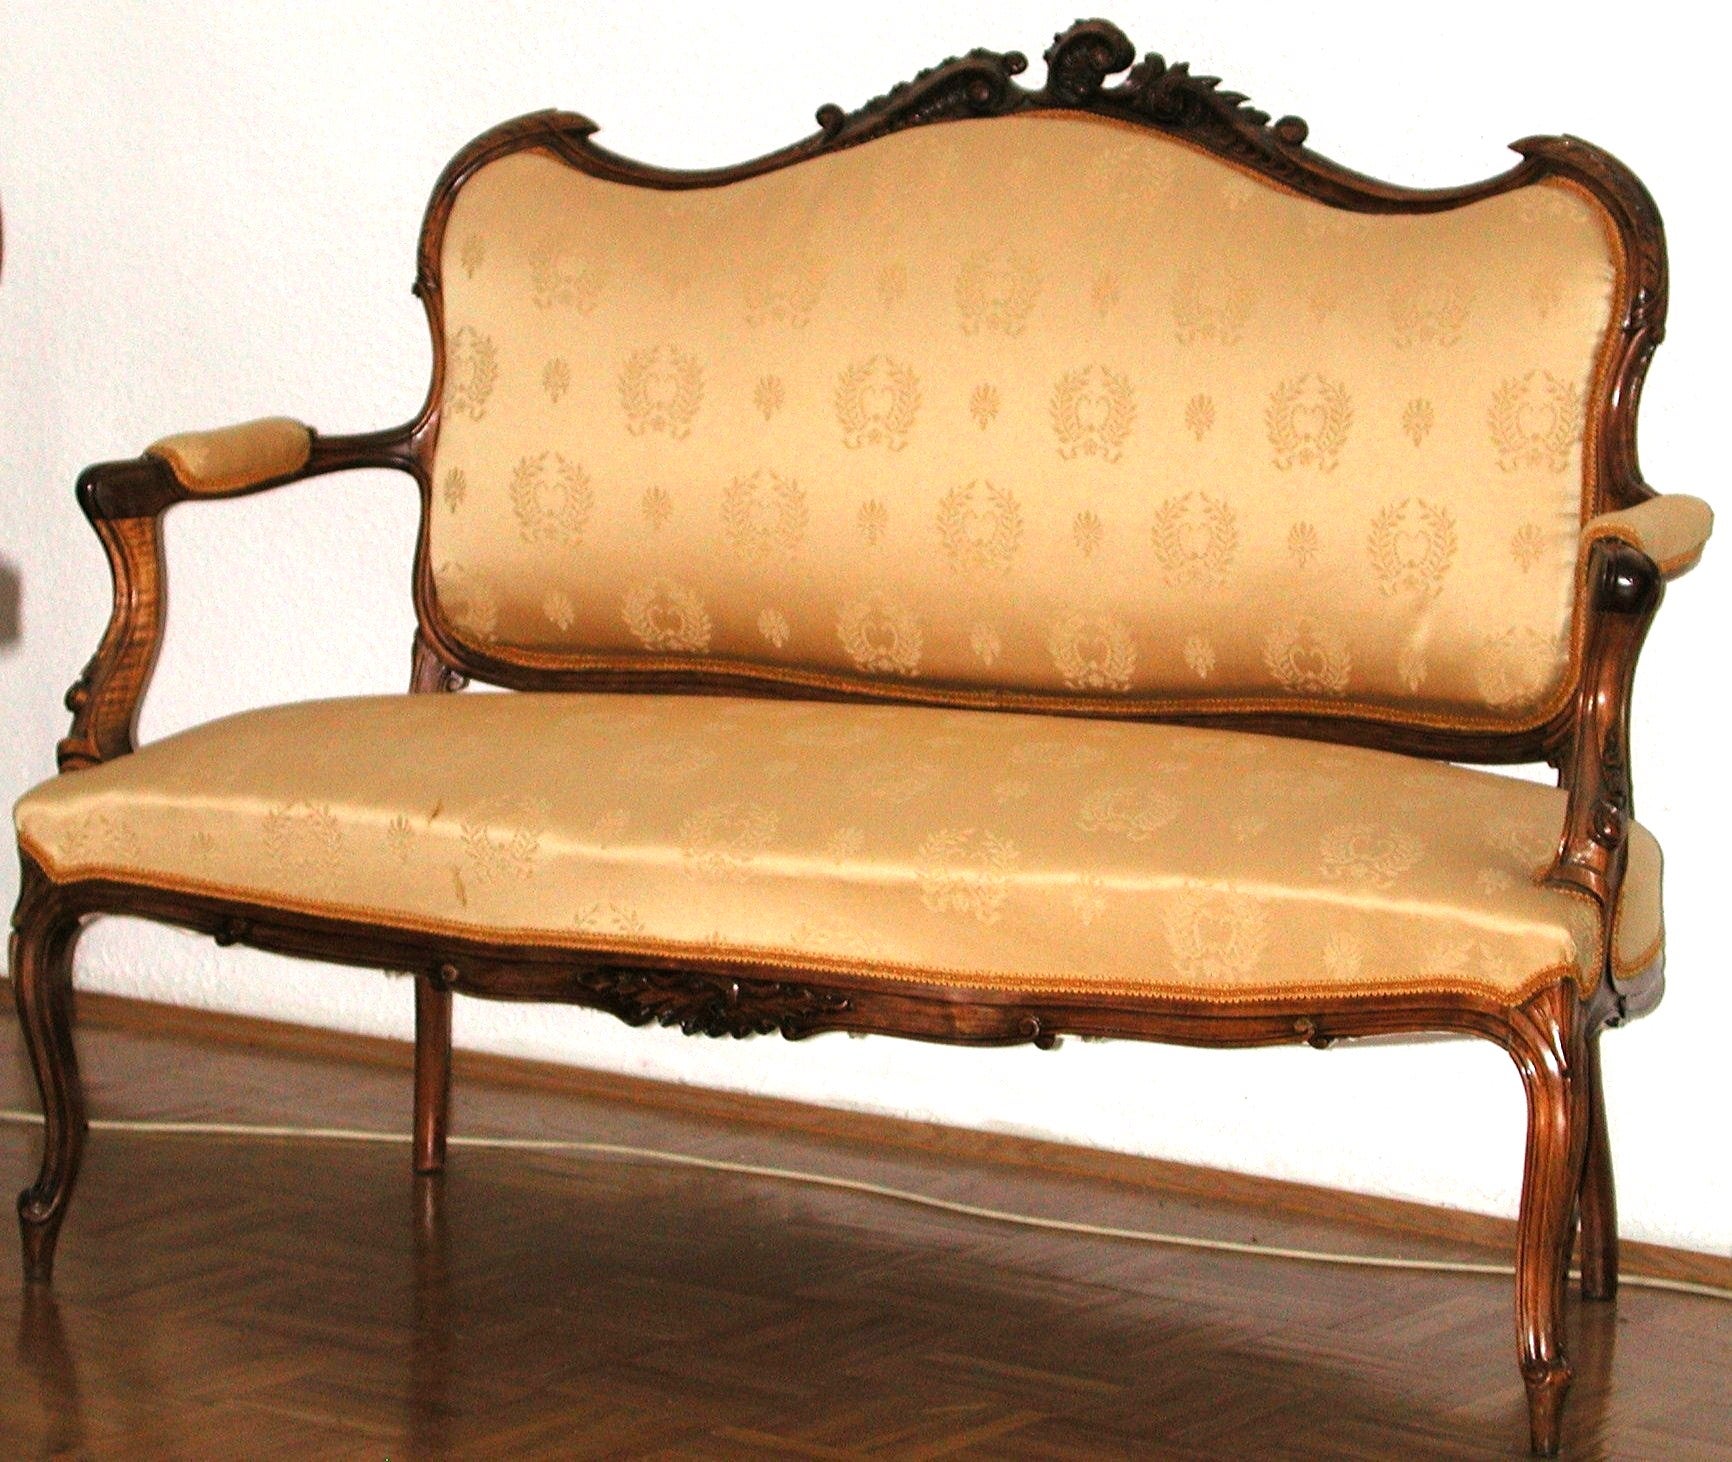 SUPER SALE! -  Superb French  Louis XV 19 c  Walnut Sofa/ settee For Sale